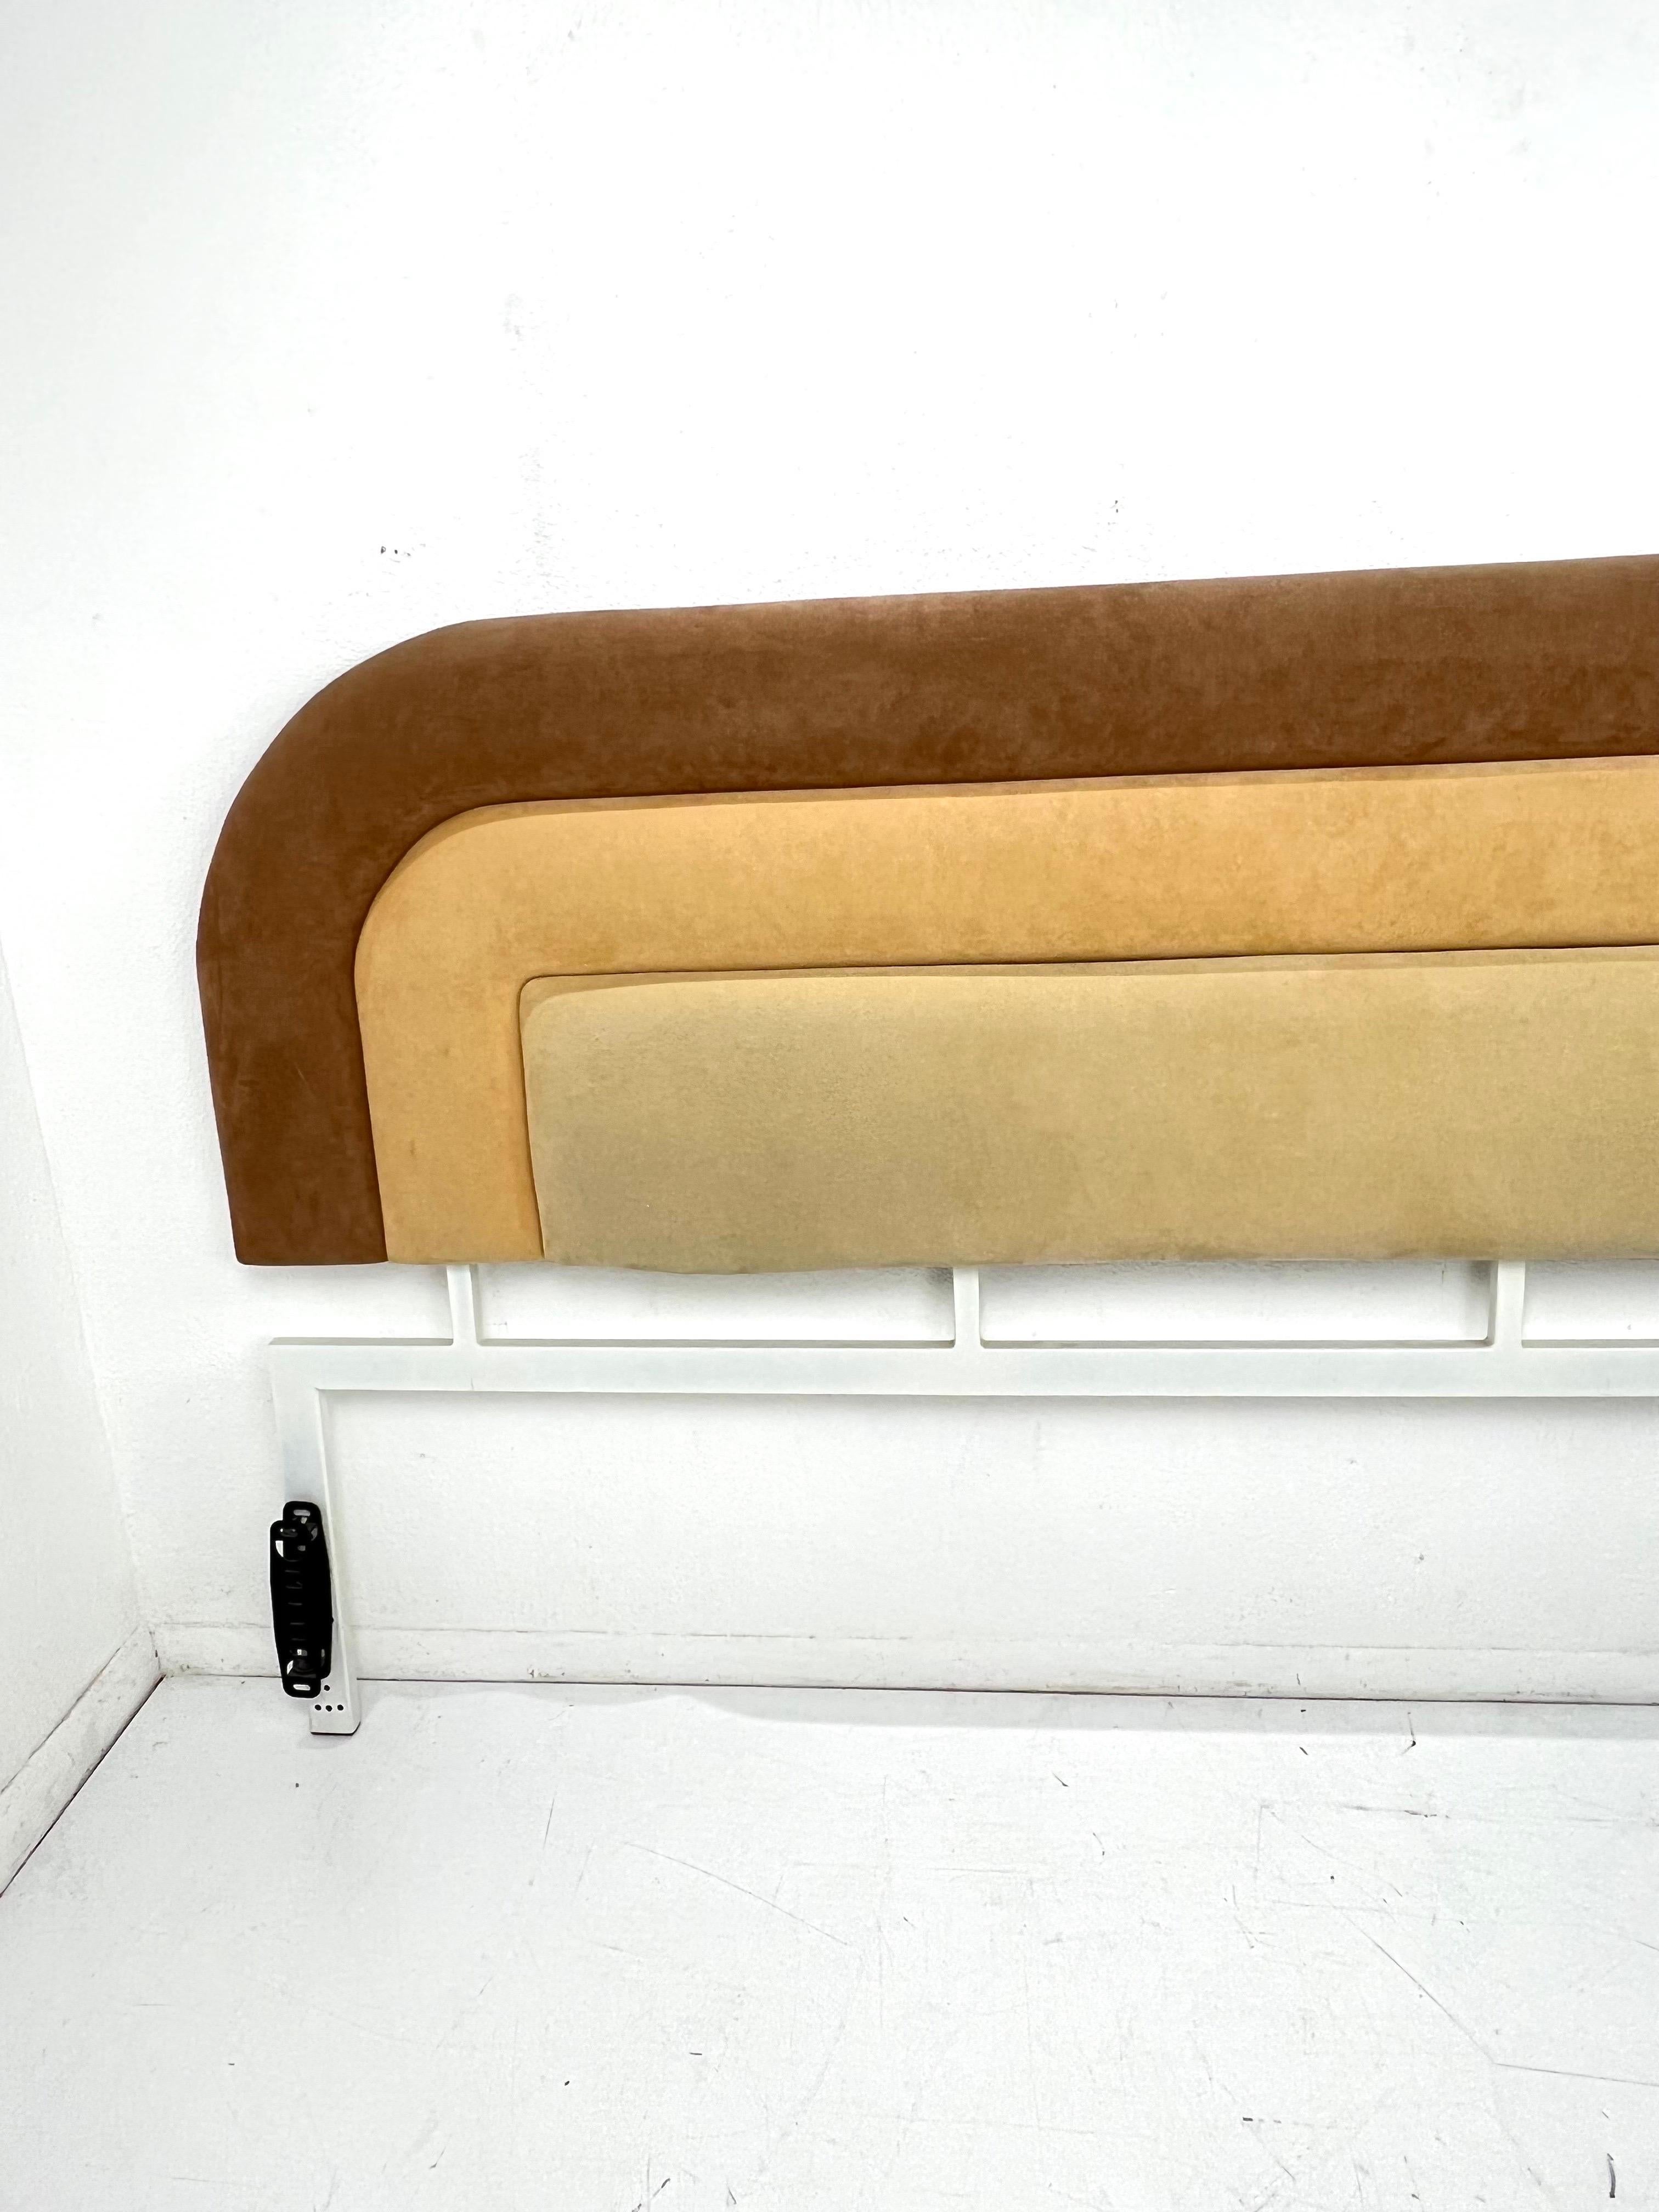 Postmodern upholstered king size headboard by Tri-Mark Designs in brown/tan gradient suede. Good condition with some scratches/scuffs due to age/use. 